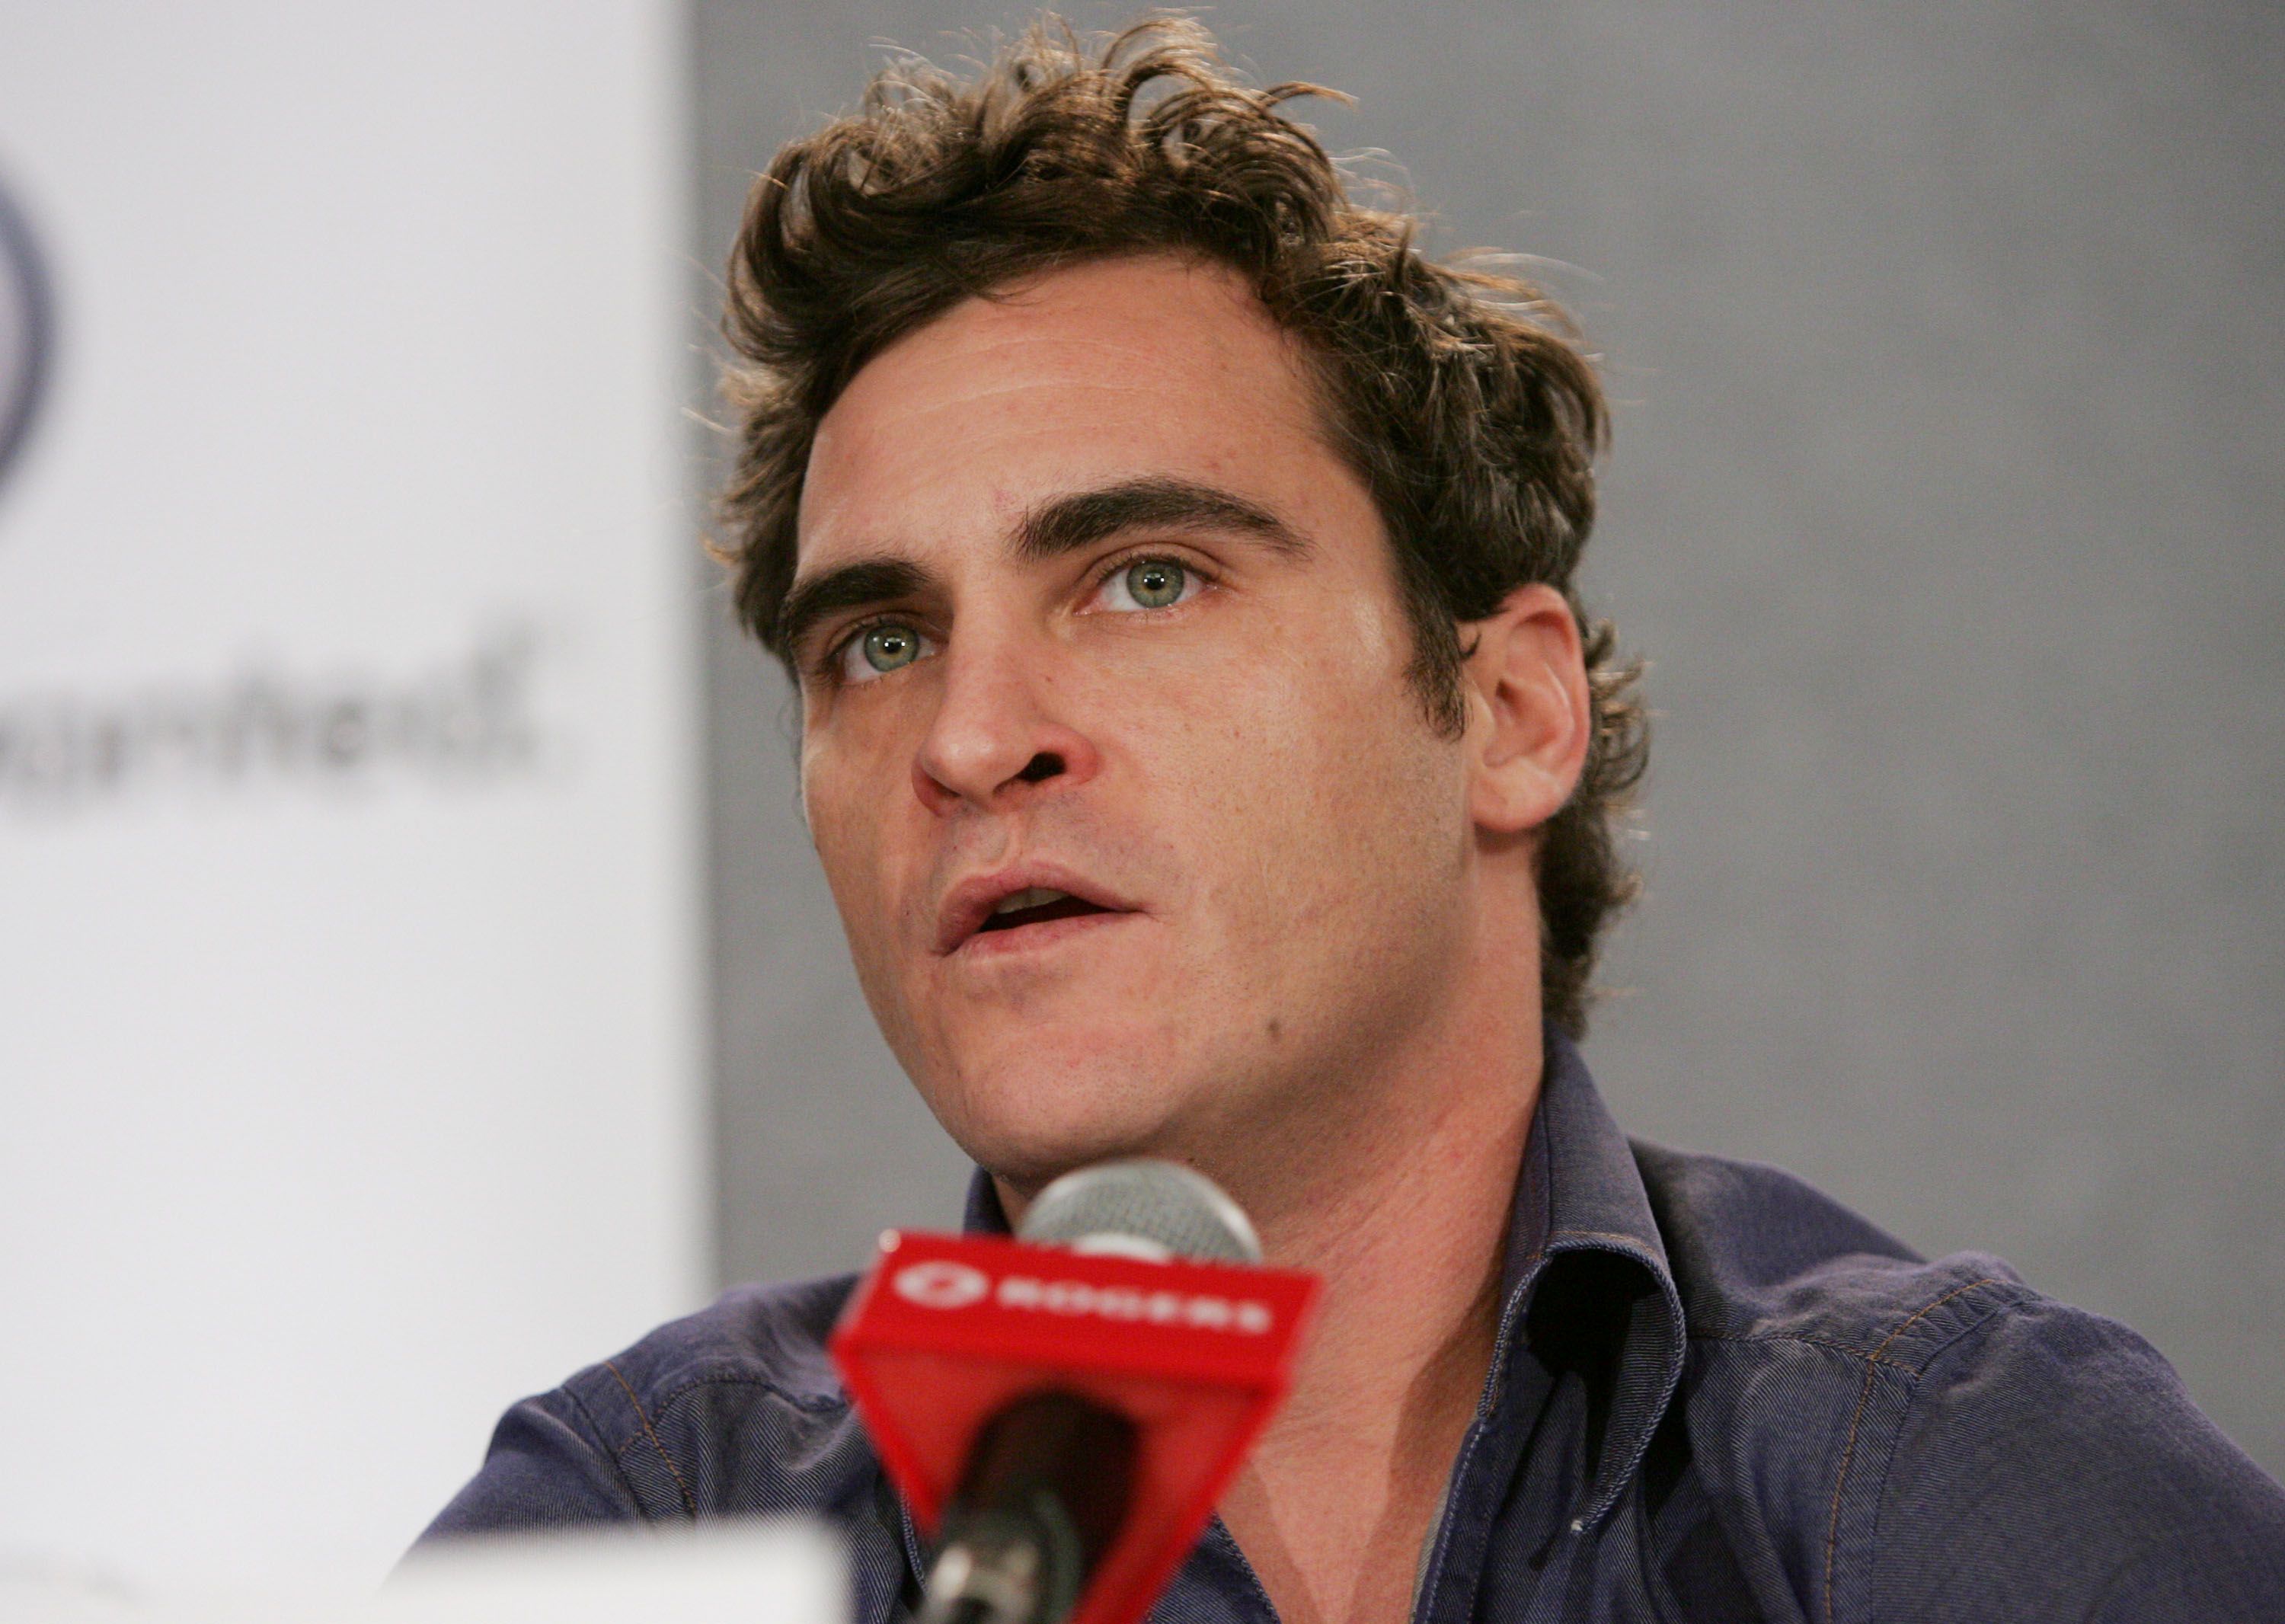 Joaquin Phoenix during the "walk the line" press conference during the 2005 Toronto International Film Festival on September 13, 2005 in Toronto, Ontario, Canada.  |  Source: Getty Images